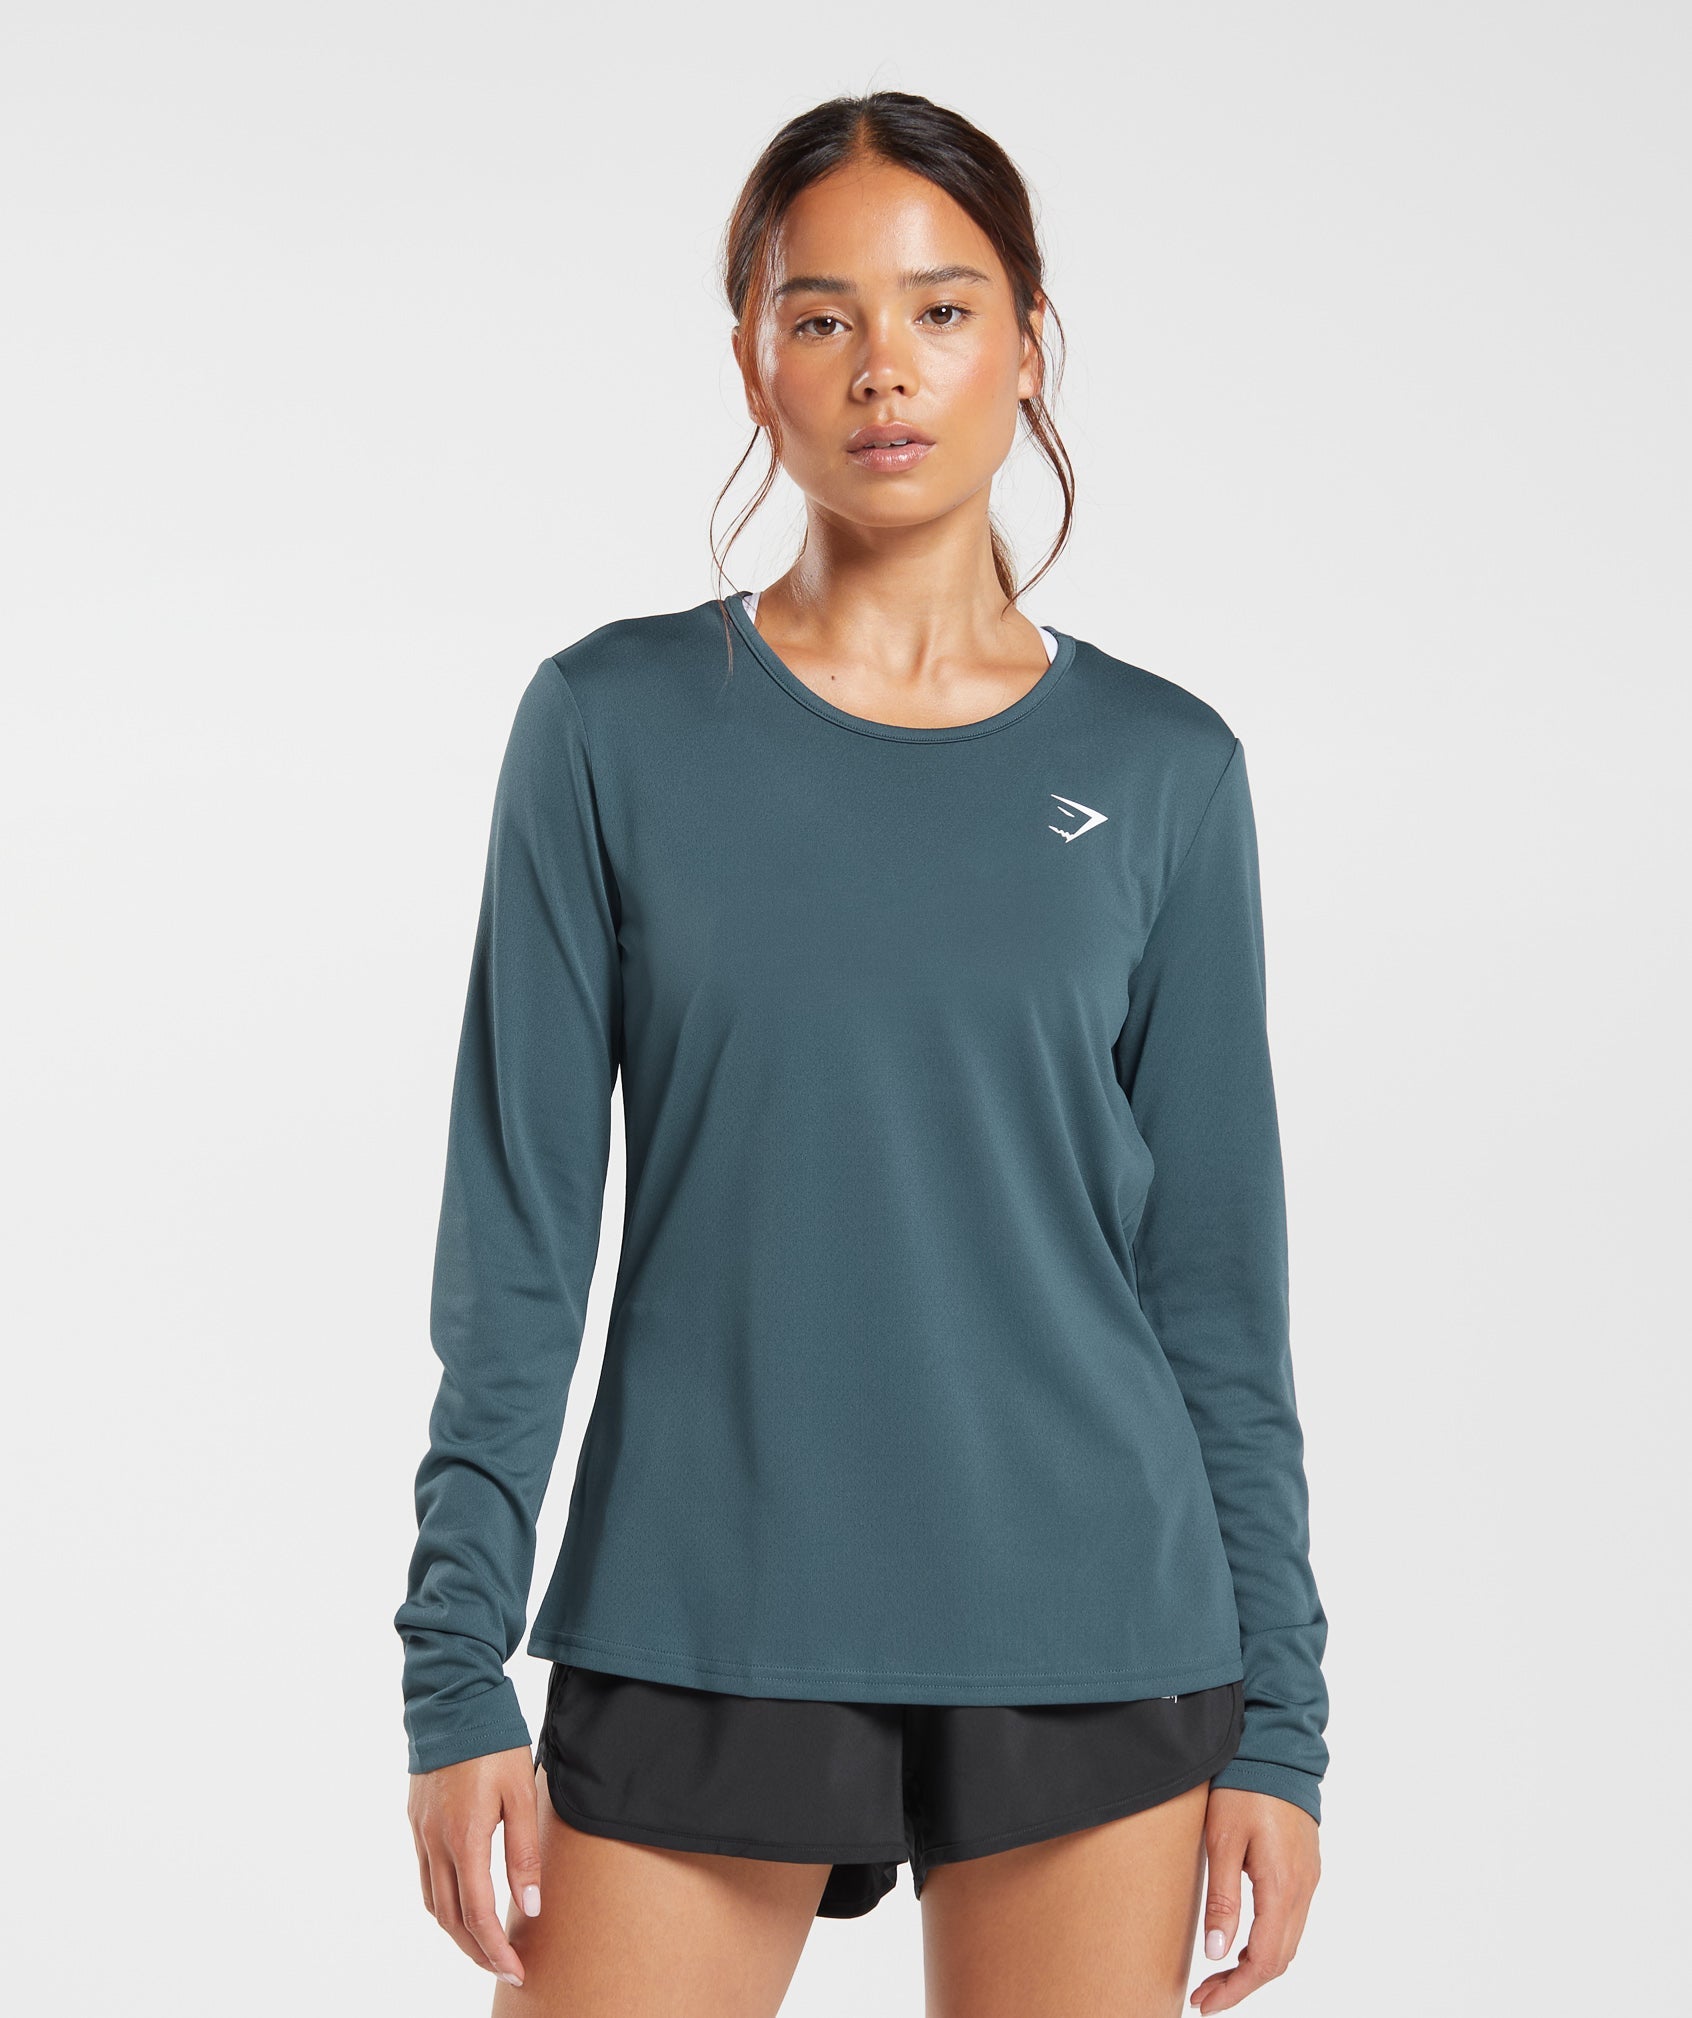 Training Long Sleeve Top in Smokey Teal - view 1